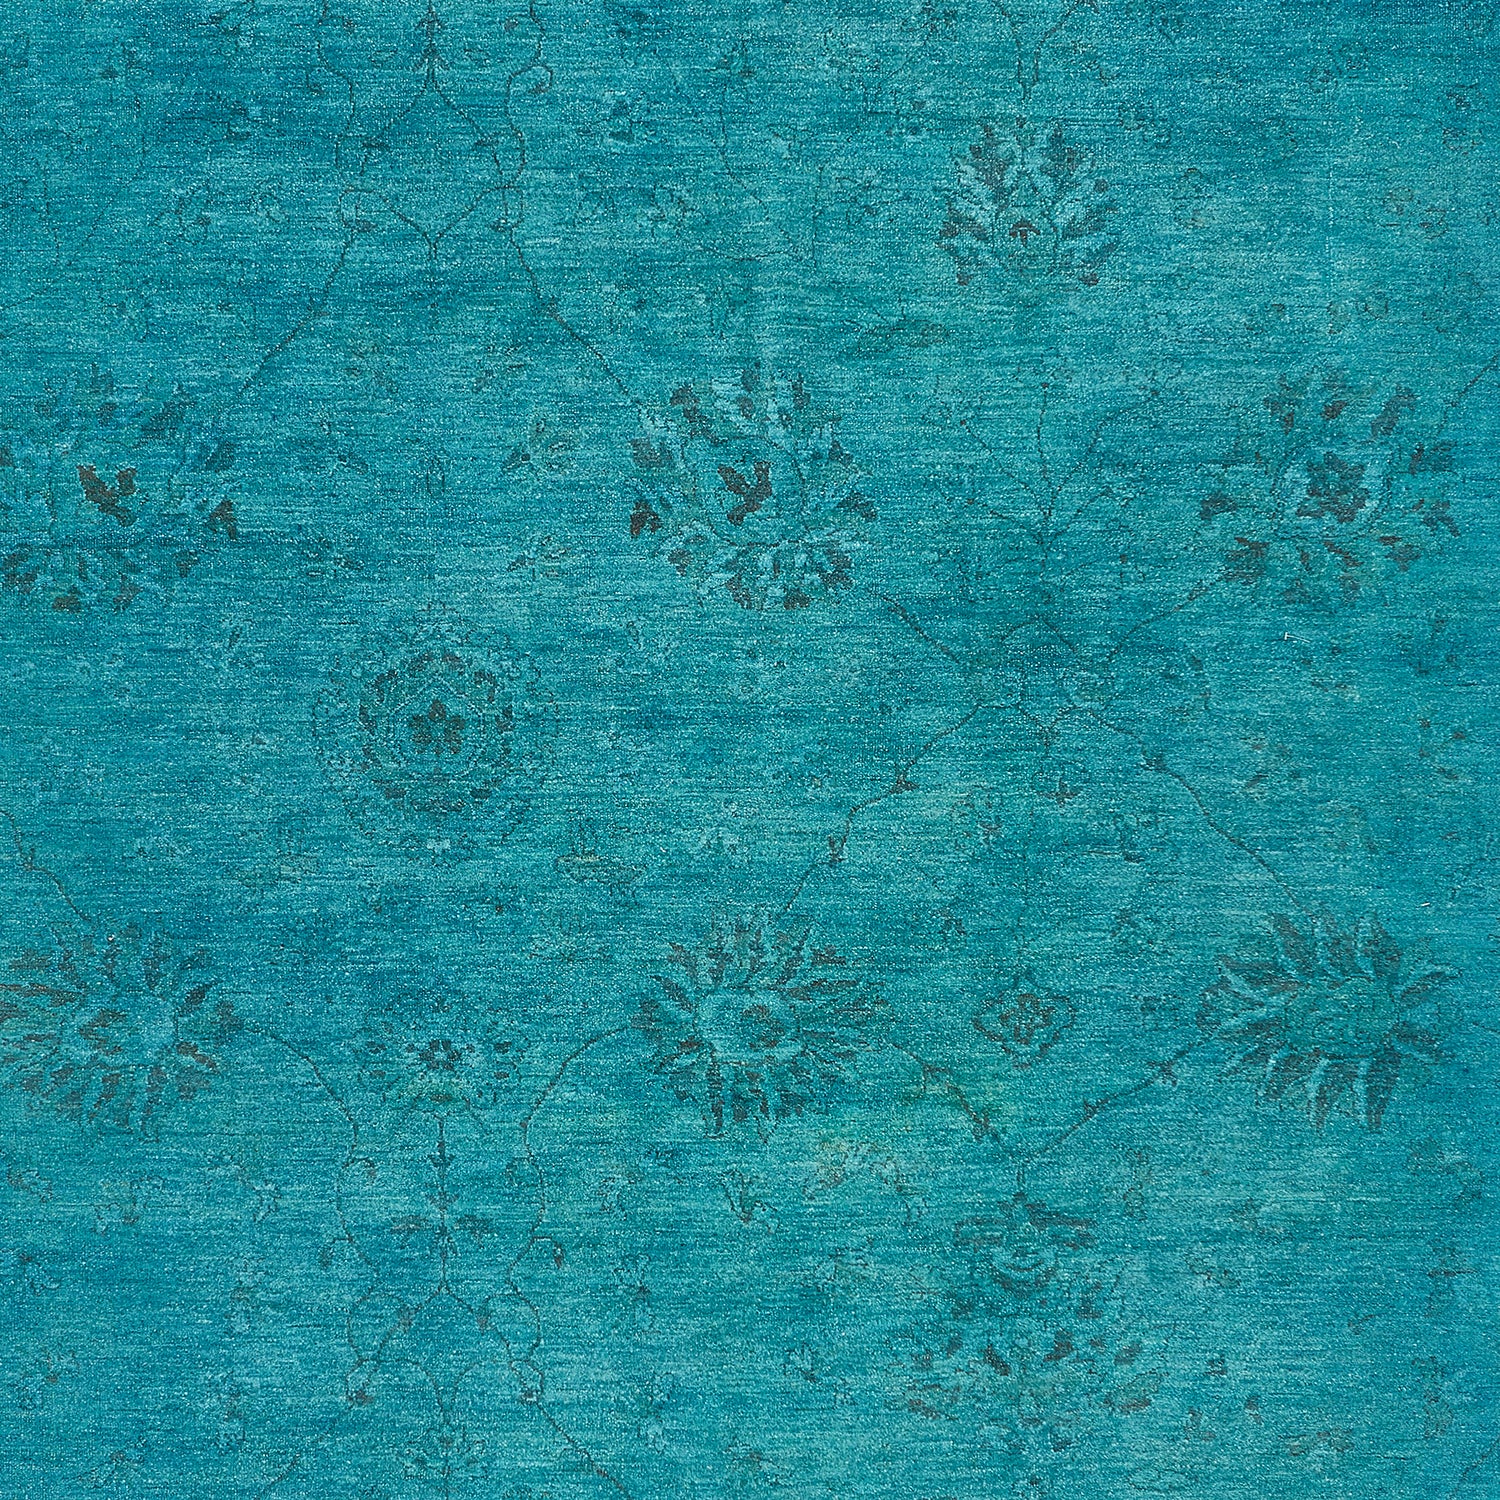 Blue Overdyed Wool Rug - 6'9" x 13'